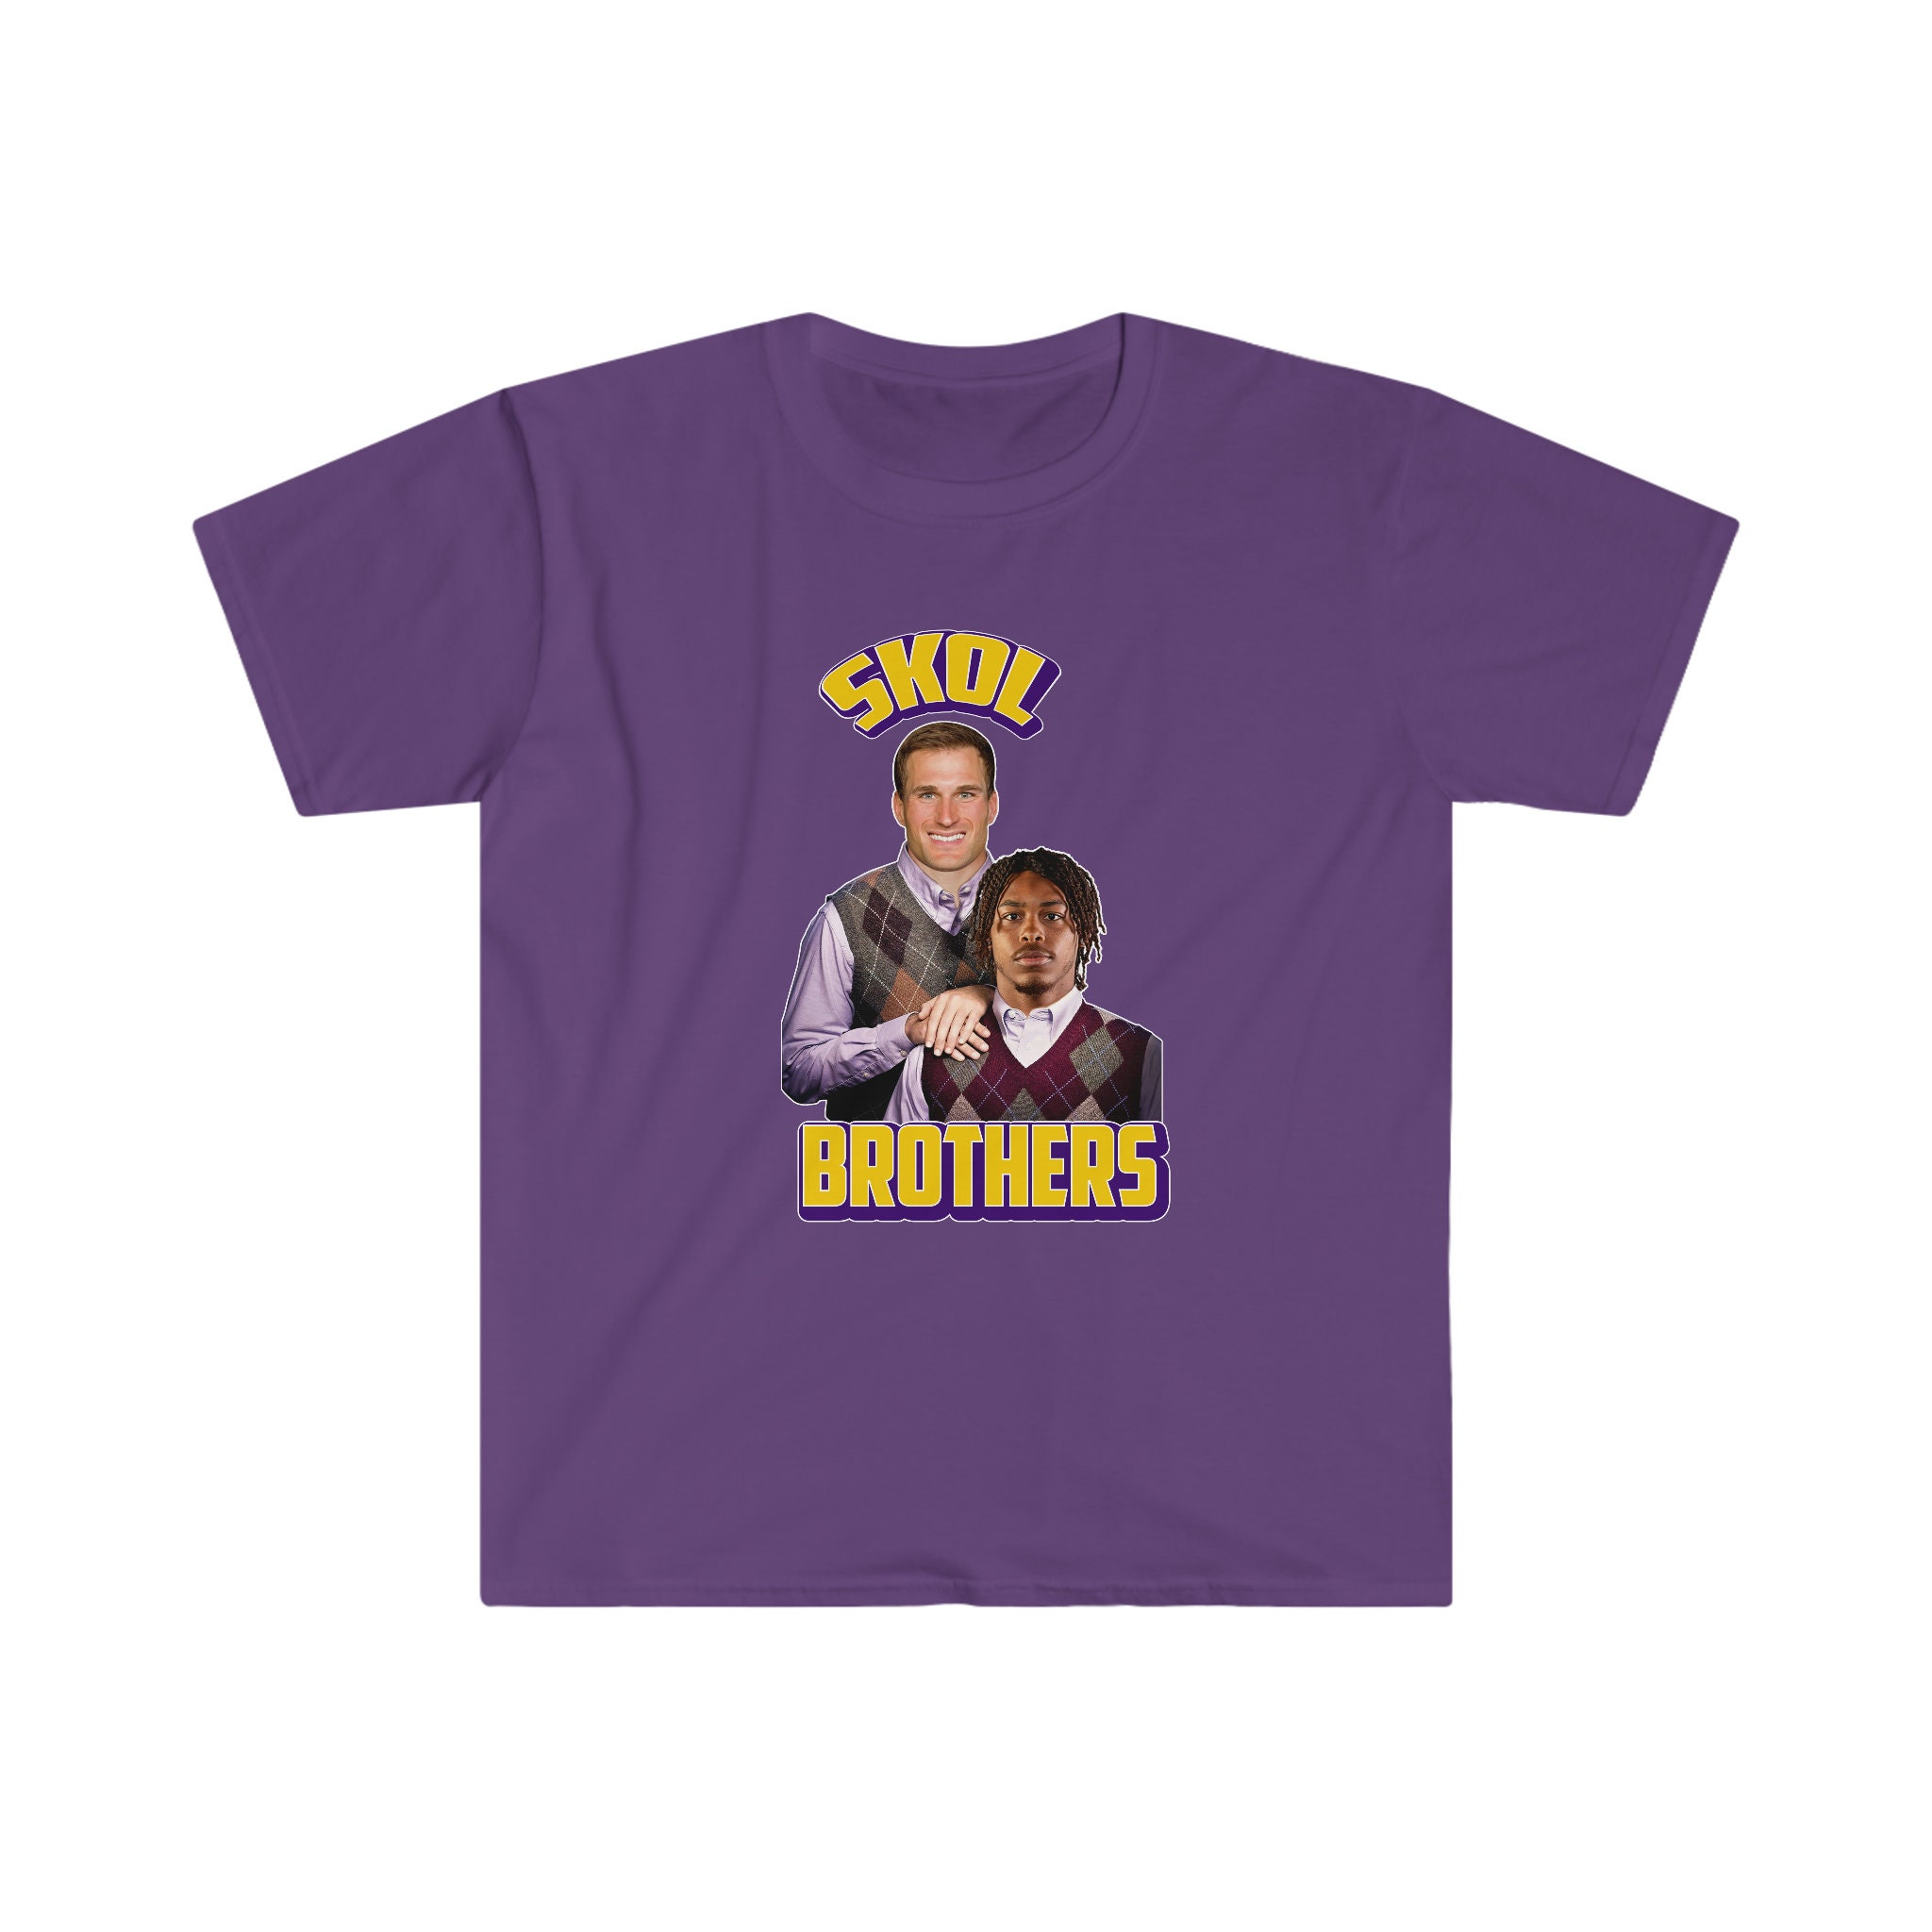 SKOL Brothers ( Cousins and Jefferson )Unisex Softstyle T-Shirt